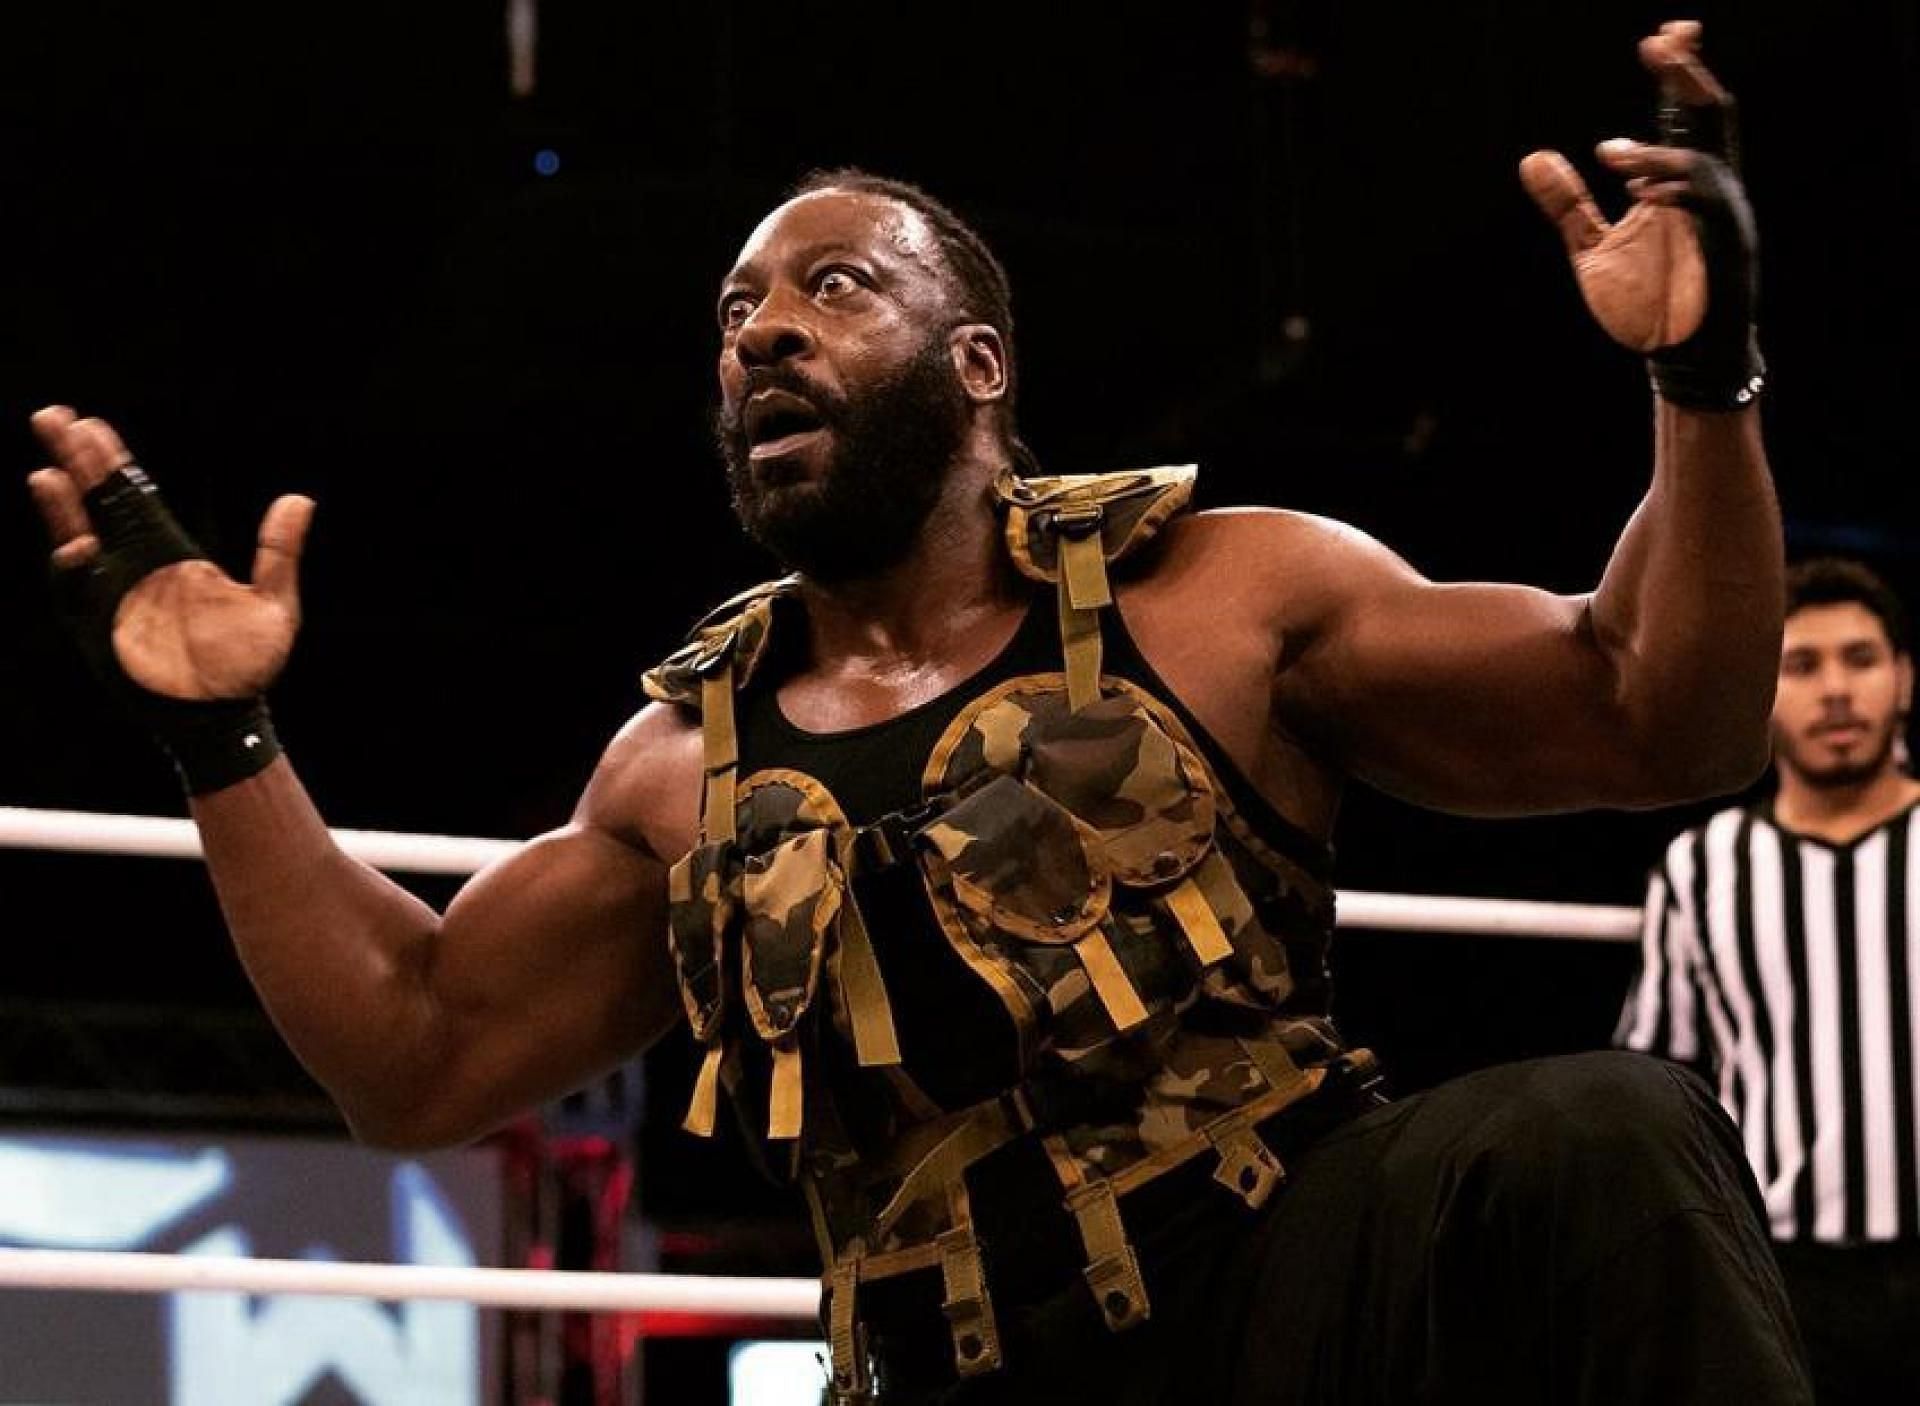 WWE Hall of Famer Booker T, has been challenged by an AEW star.